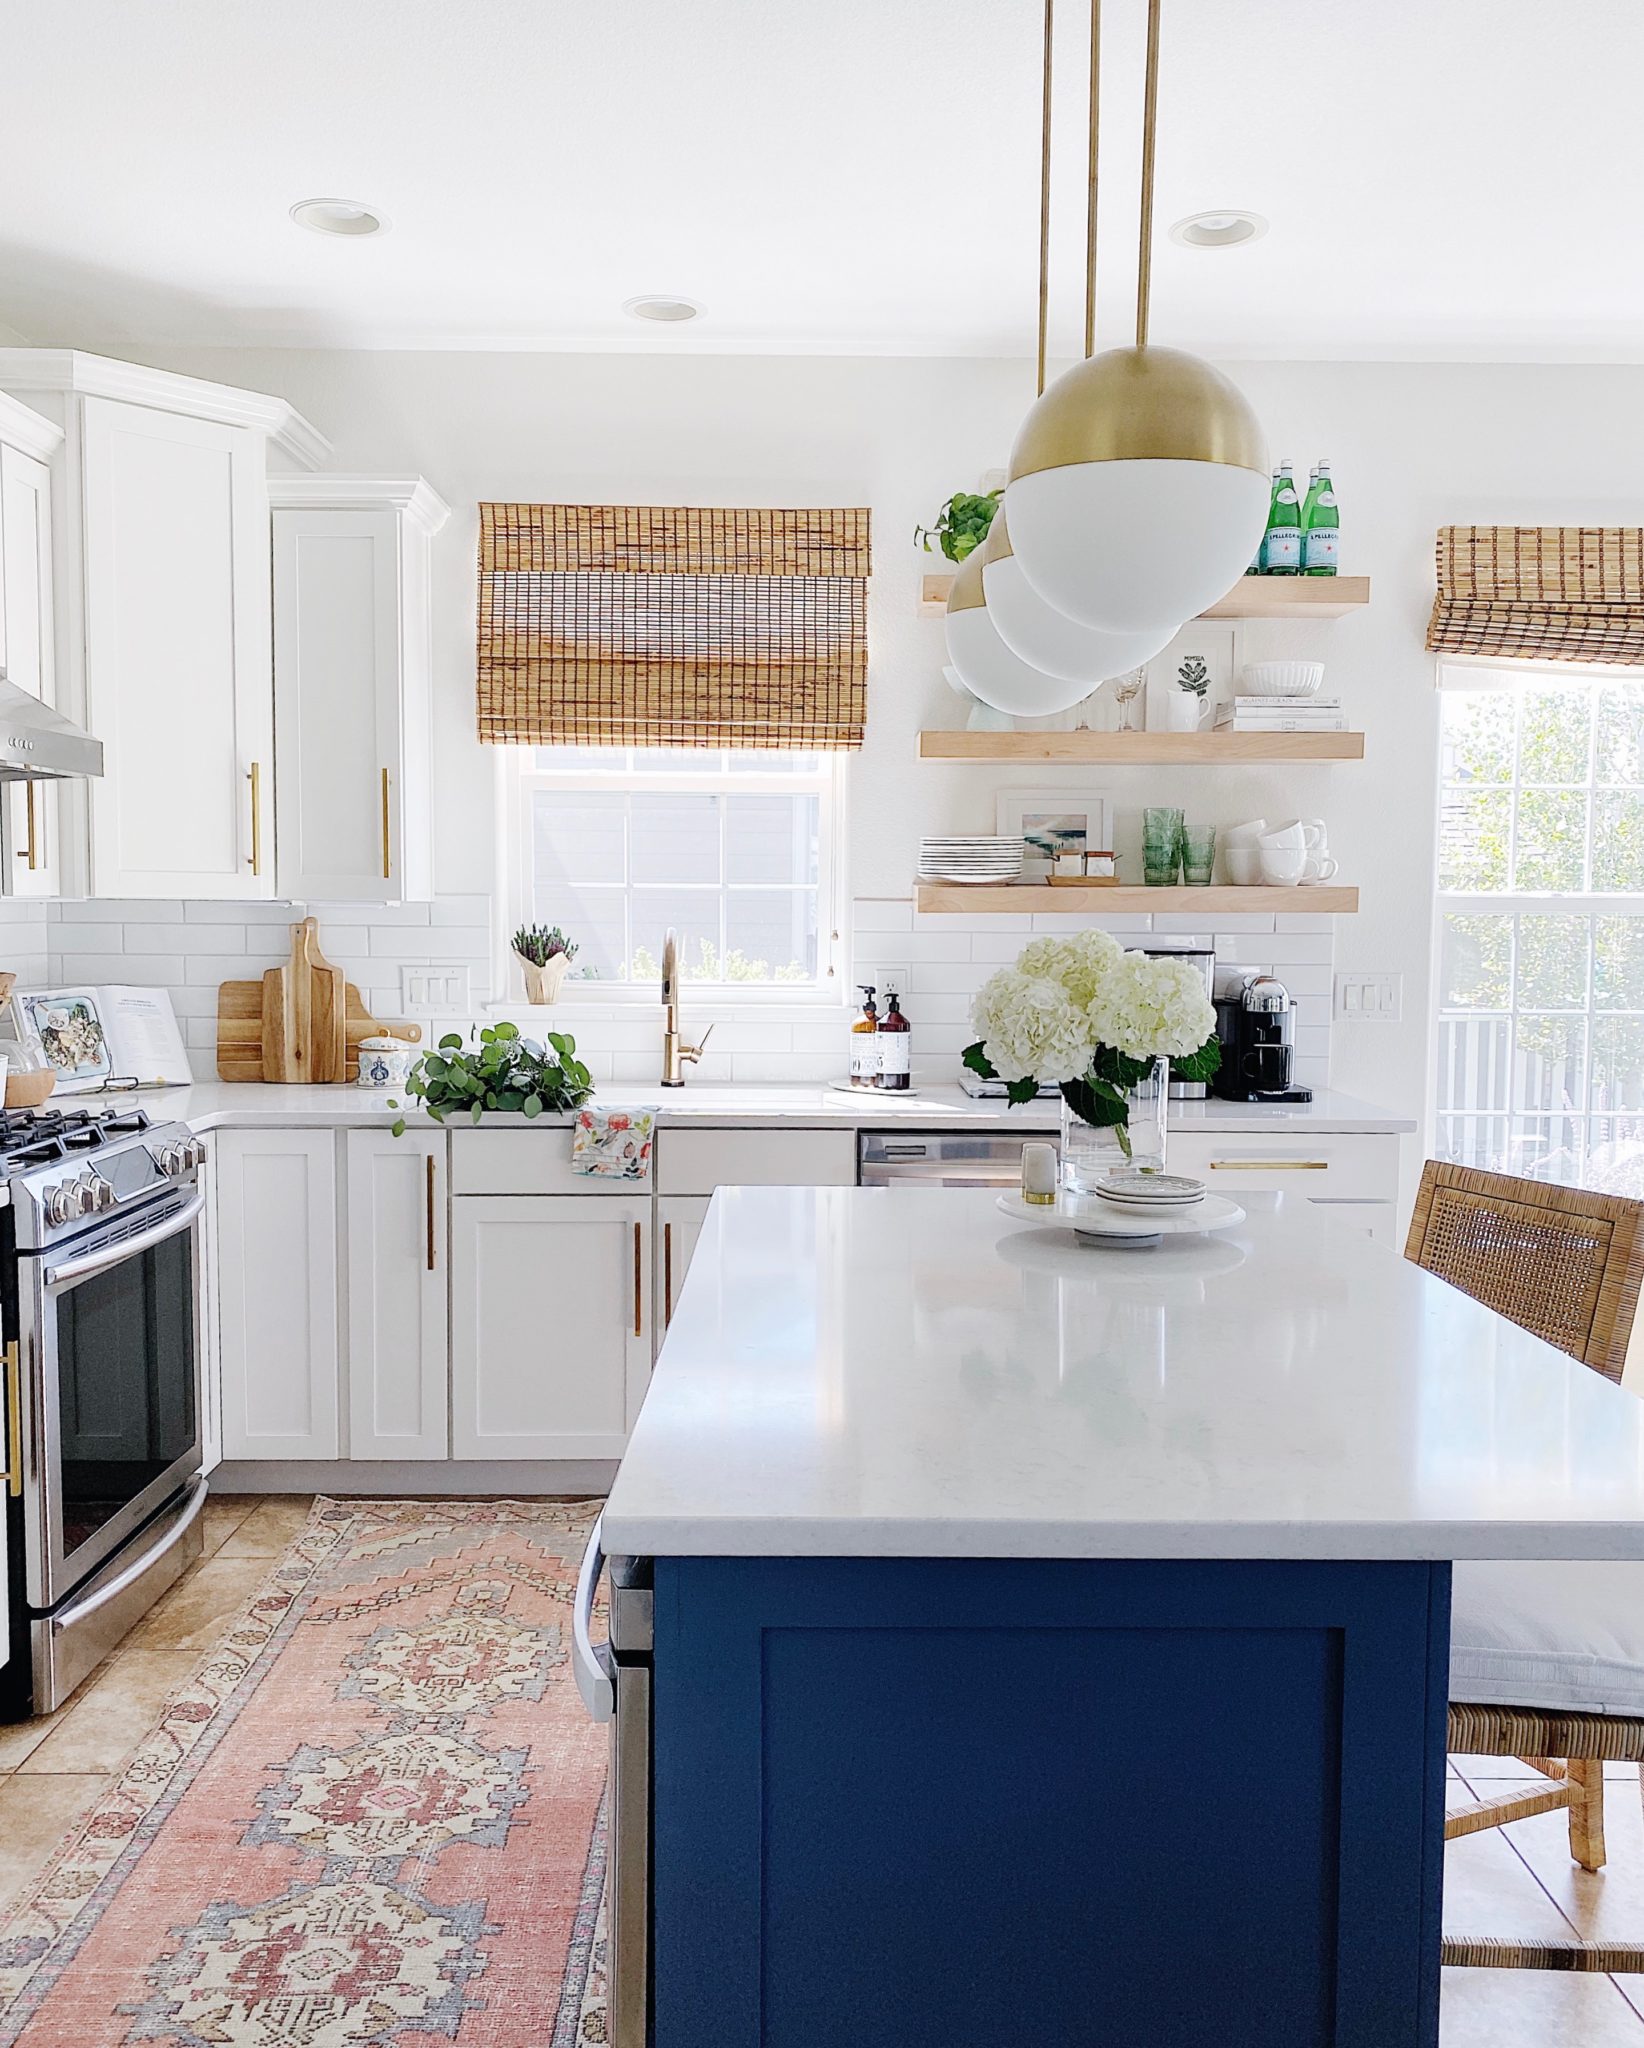 Blue and white kitchen with oushak rug and woven counter stools - jane at home #kitchendesign #bluekitchen #kitchenideas #designstyle